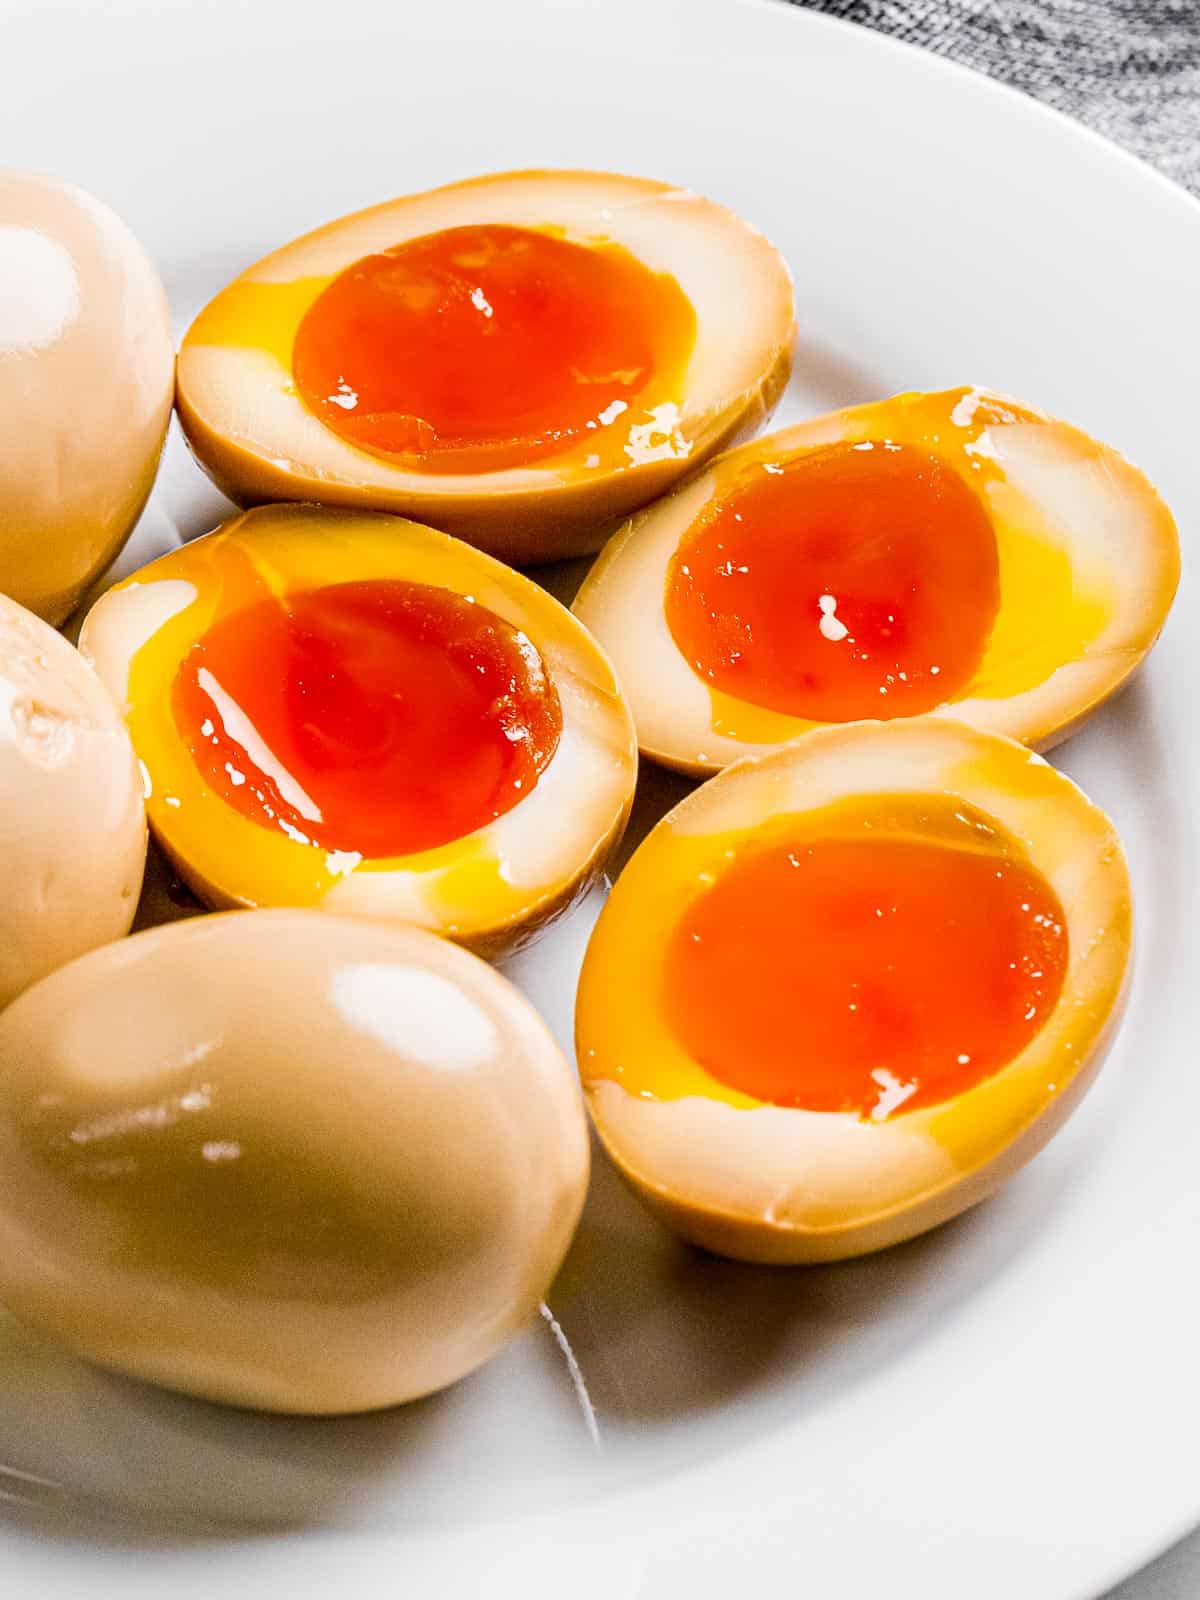 Ramen eggs or soy sauce eggs marinated in a soy mirin mixture that's been cut in half to show jammy yolk.